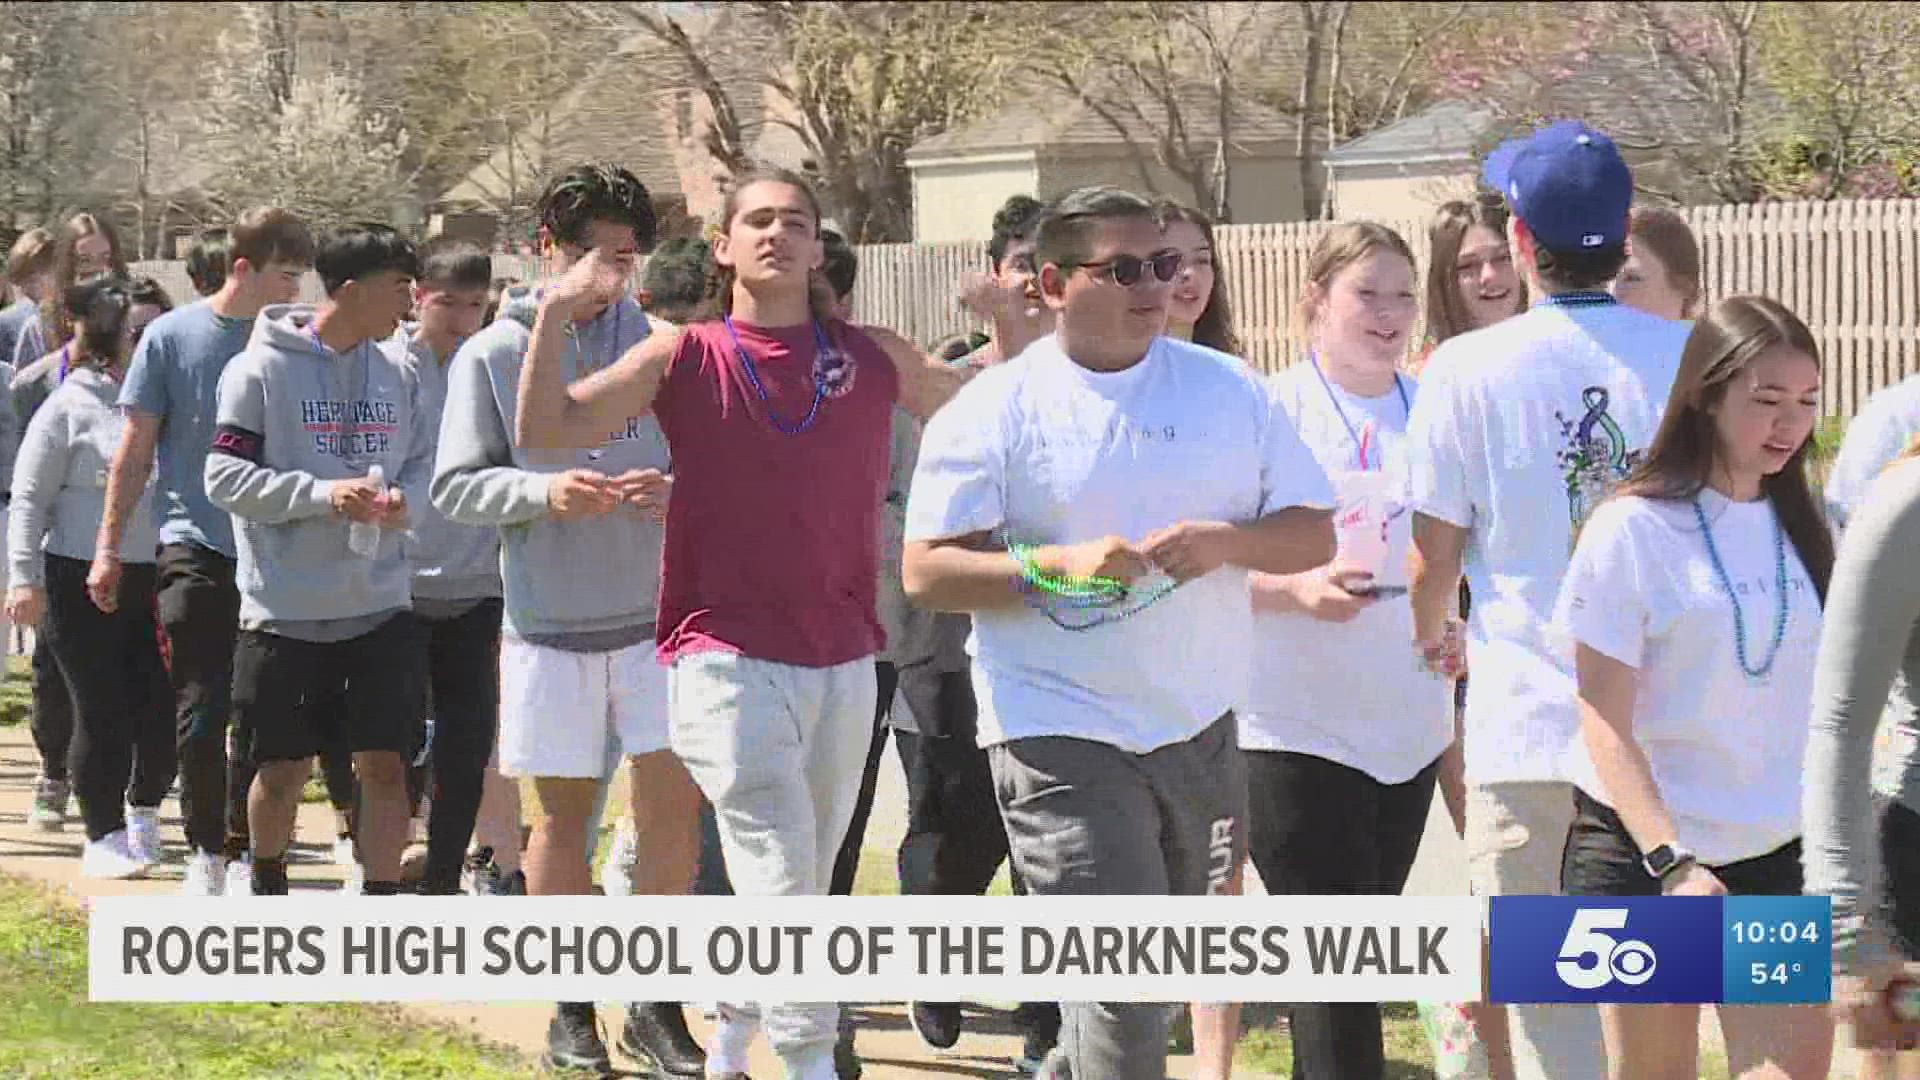 Out of the Darkness suicide prevention and awareness walk was held at Rogers High School on Saturday, April 9, 2022.